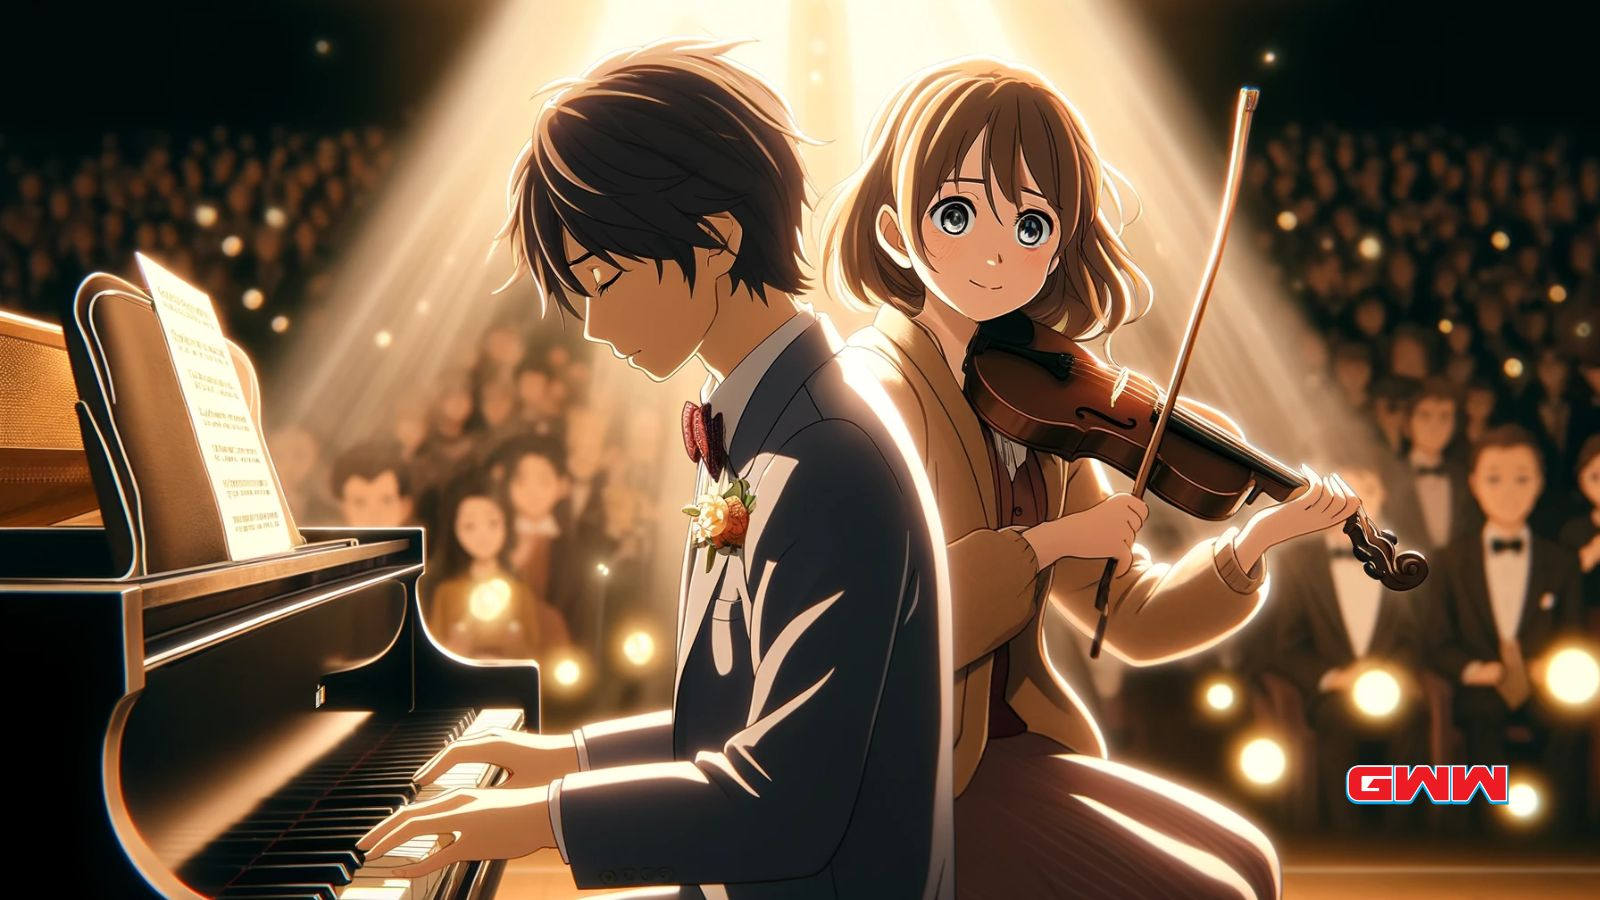 Kousei and Kaori performing together in best love romance anime